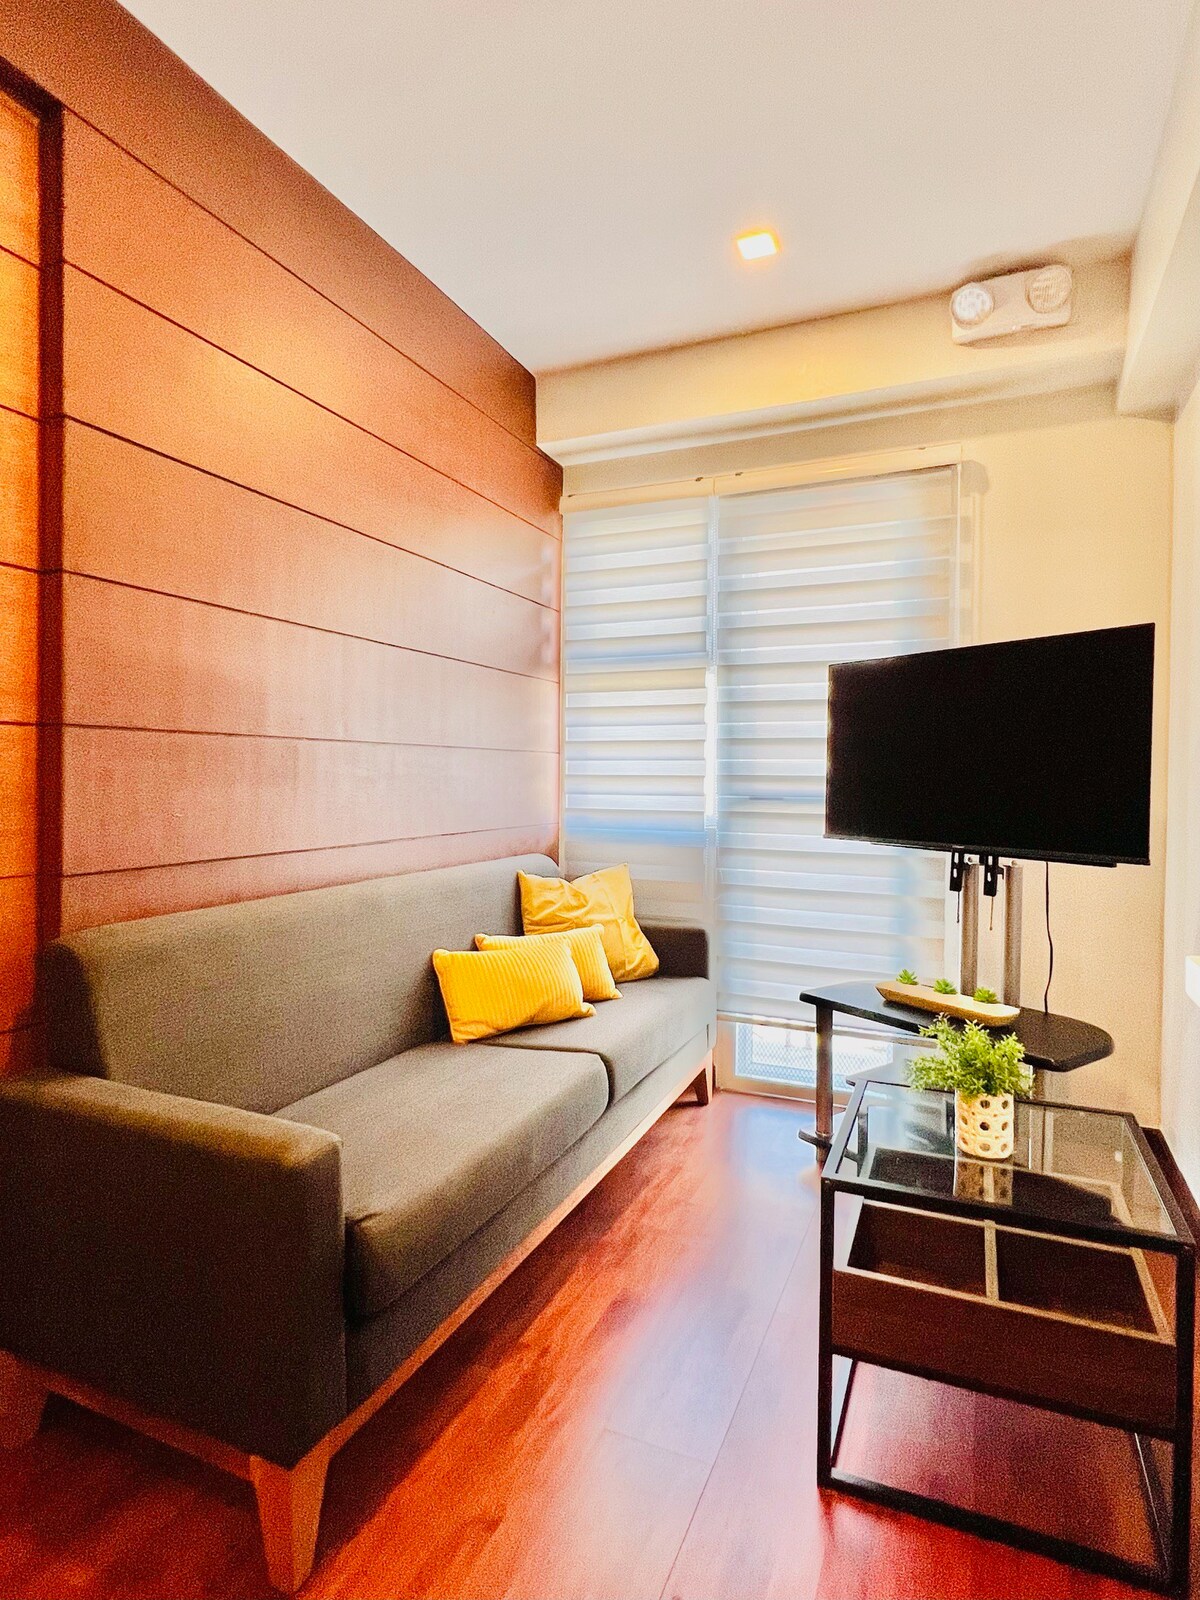 Spacious Deluxe Room near SMX and Ayala